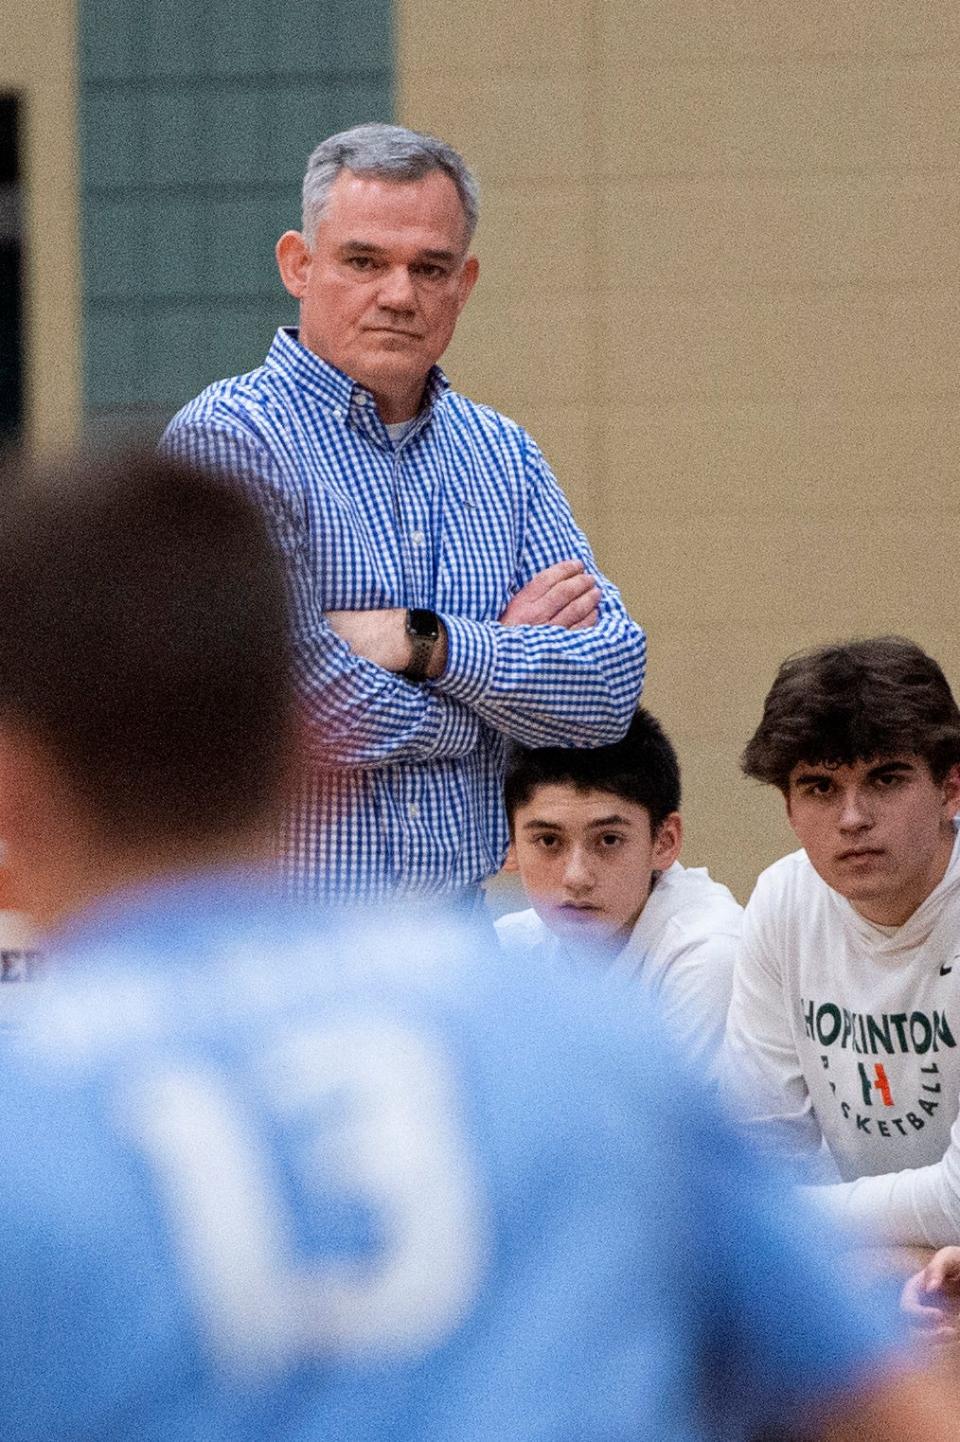 Hopkinton High head coach Tom Keane keeps his eyes on the action on the court during the game against Medfield in Hopkinton, Feb. 6, 2024. The Hillers beat the Big Blue, 79-57.